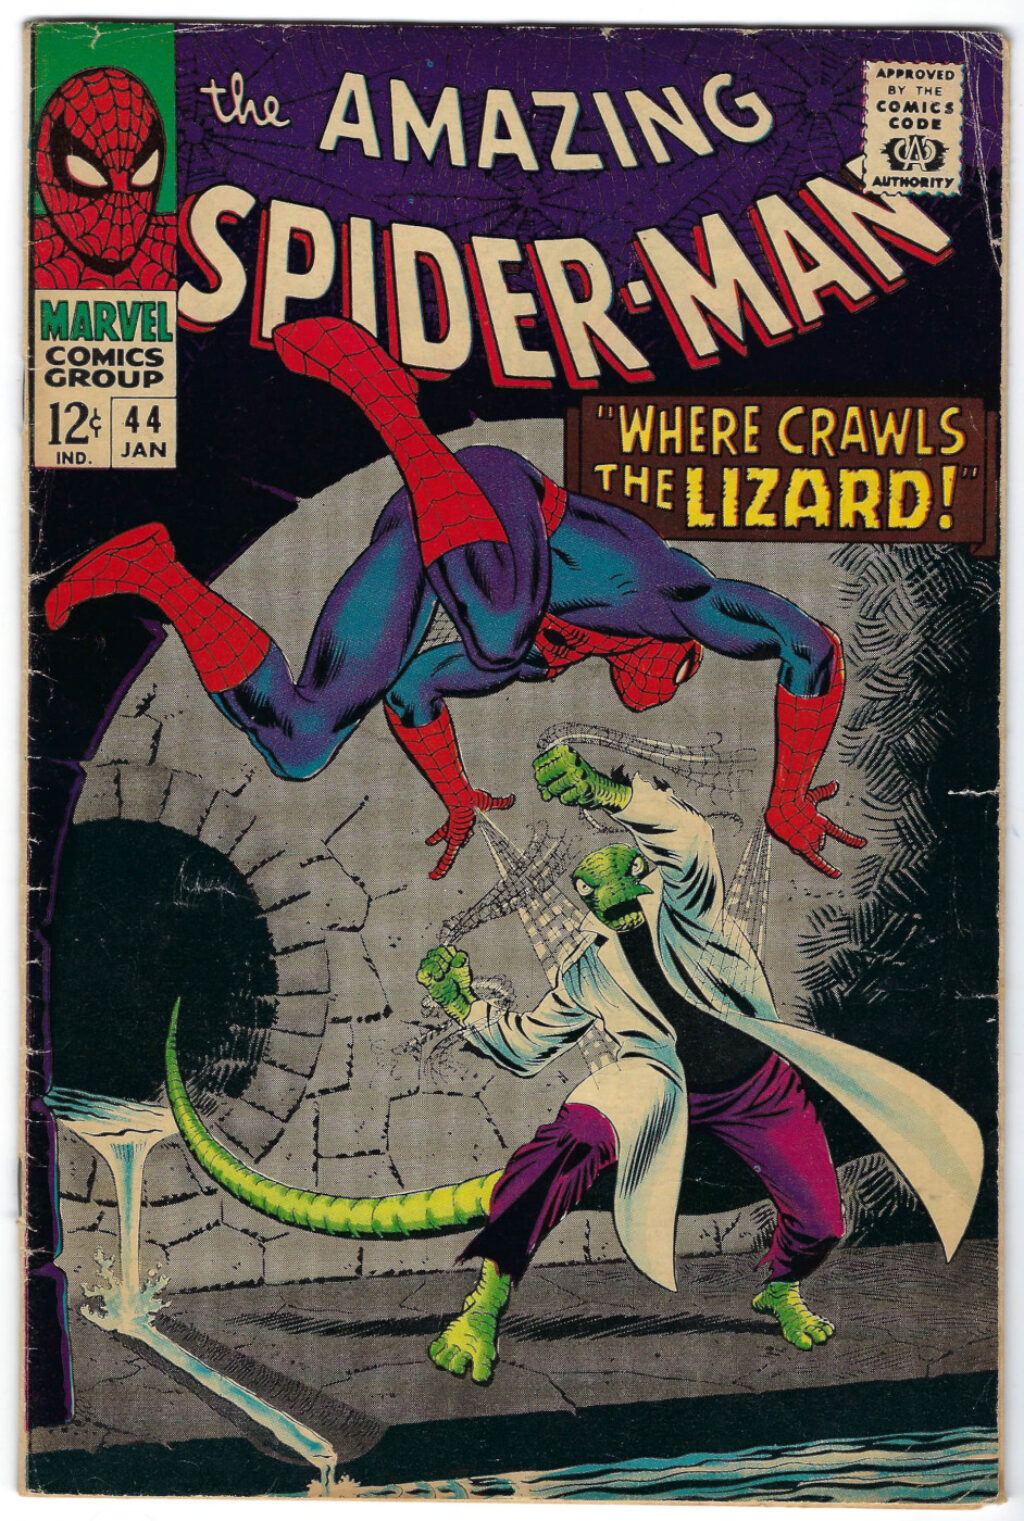 Marvel Comics Amazing Spider-Man (1963) #44: 2nd Appearance of The Lizard 1